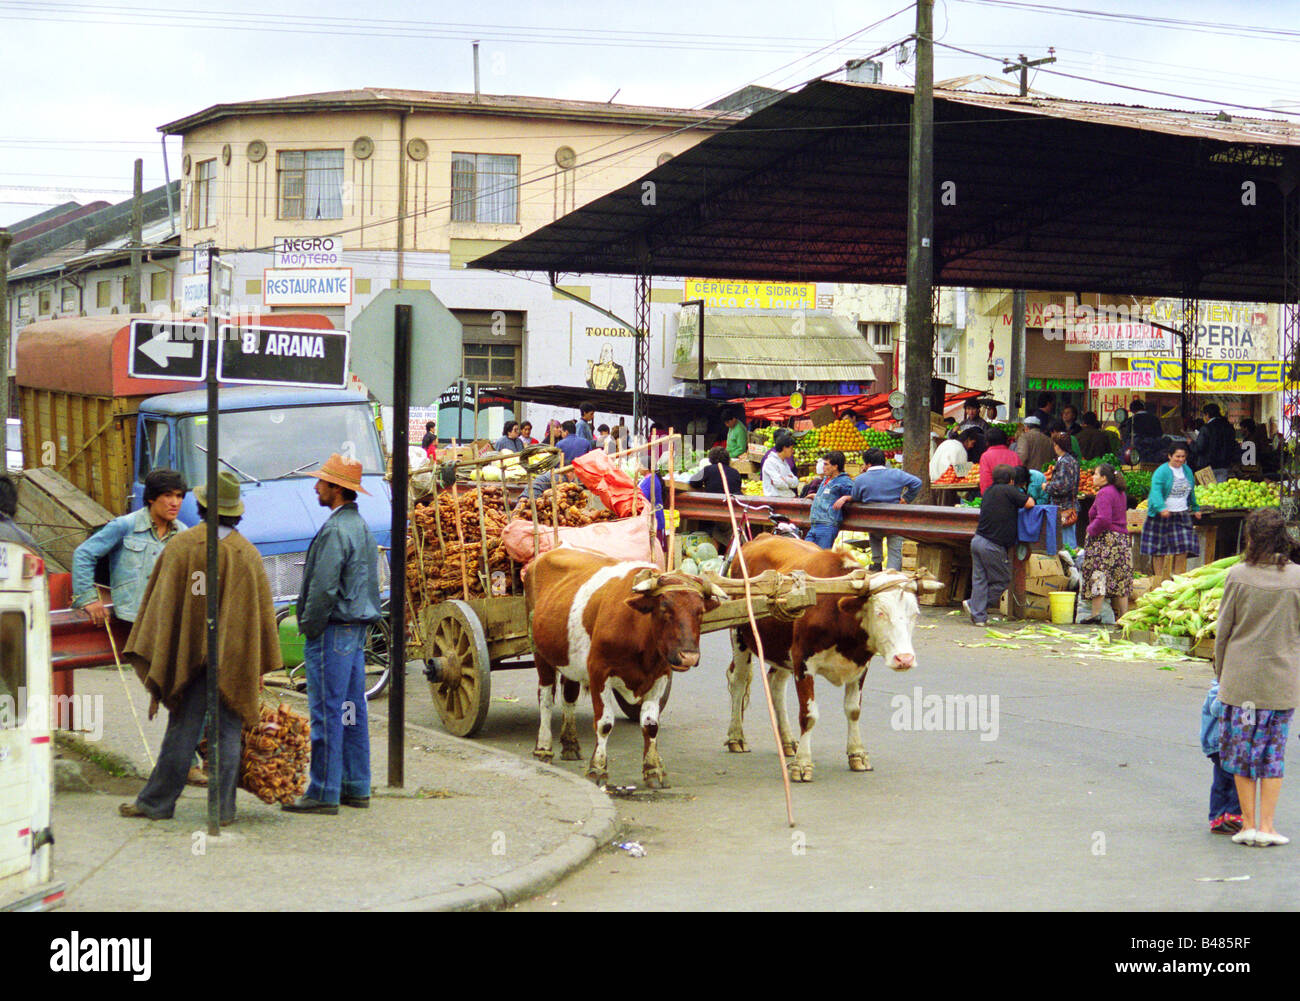 Market in Chile Stock Photo